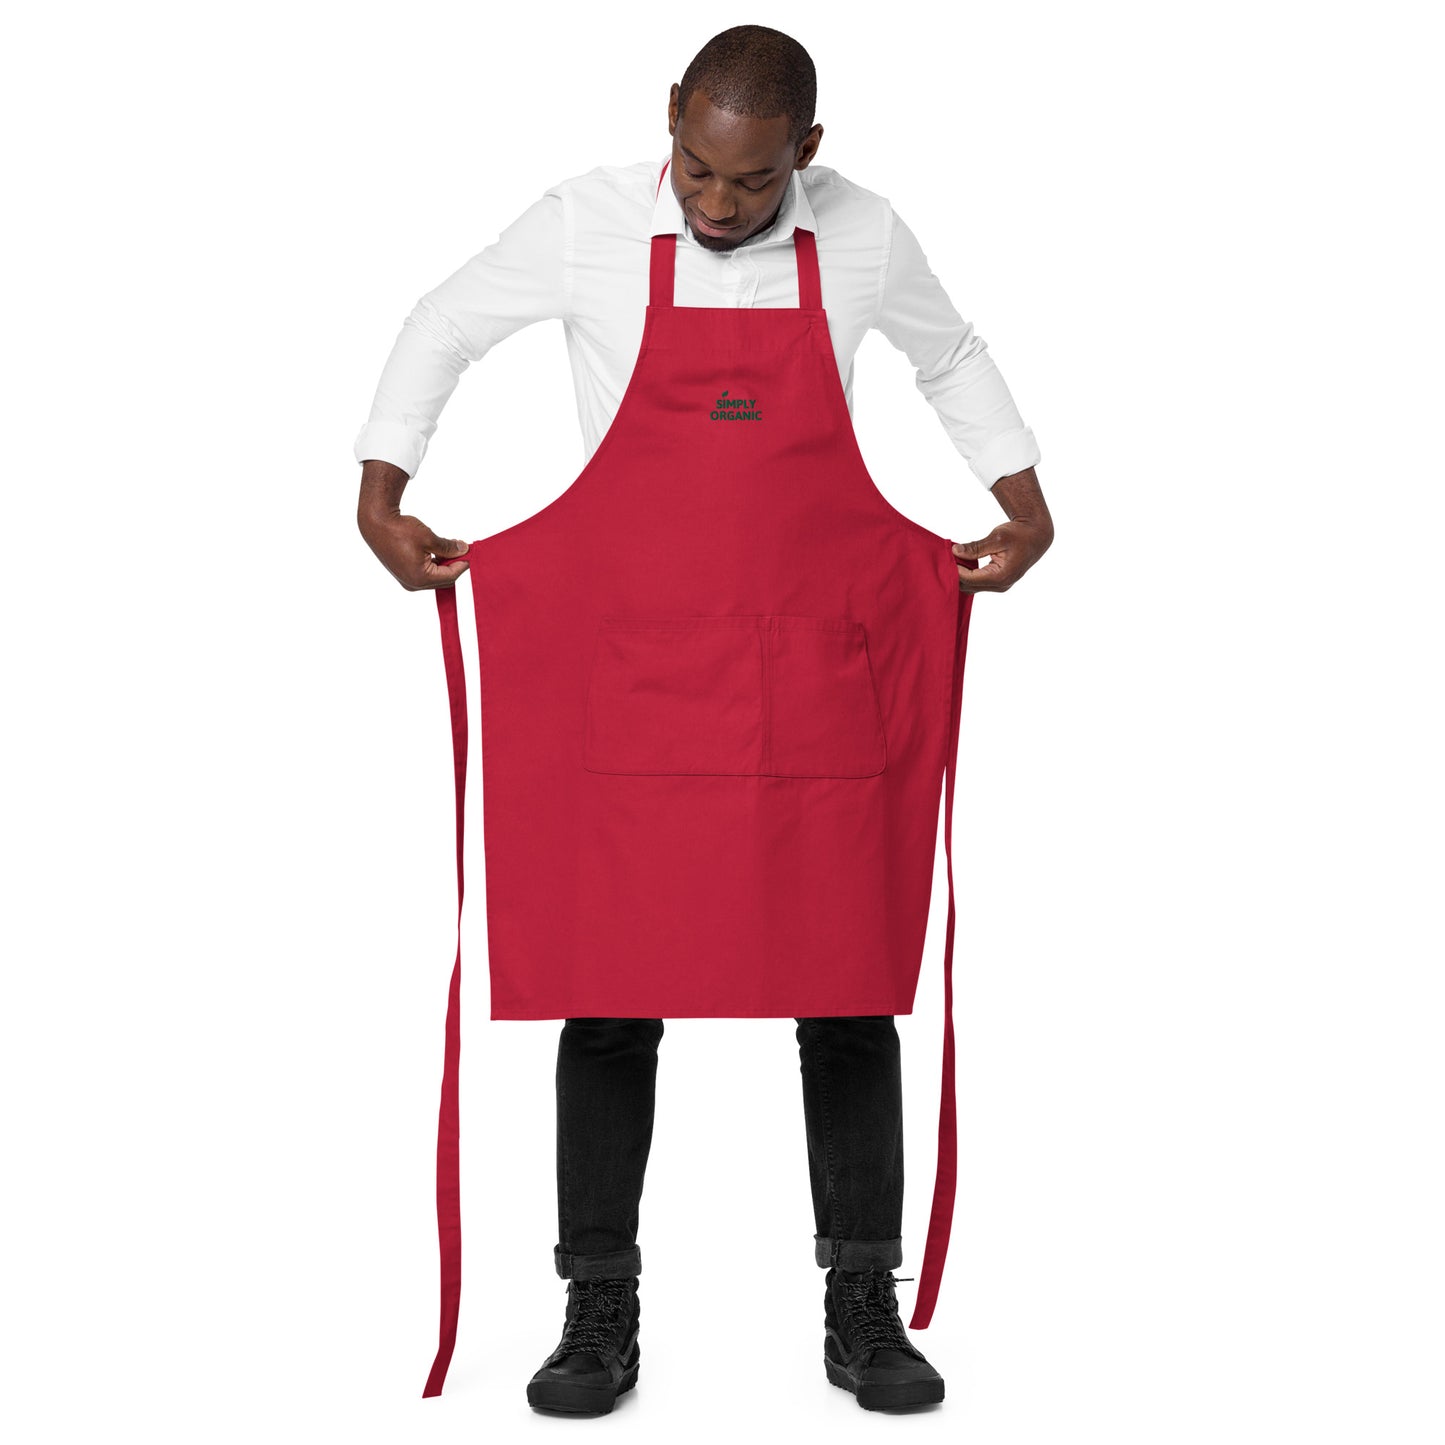 SimplyOrganic Embroidered Organic Cotton Apron red open front view